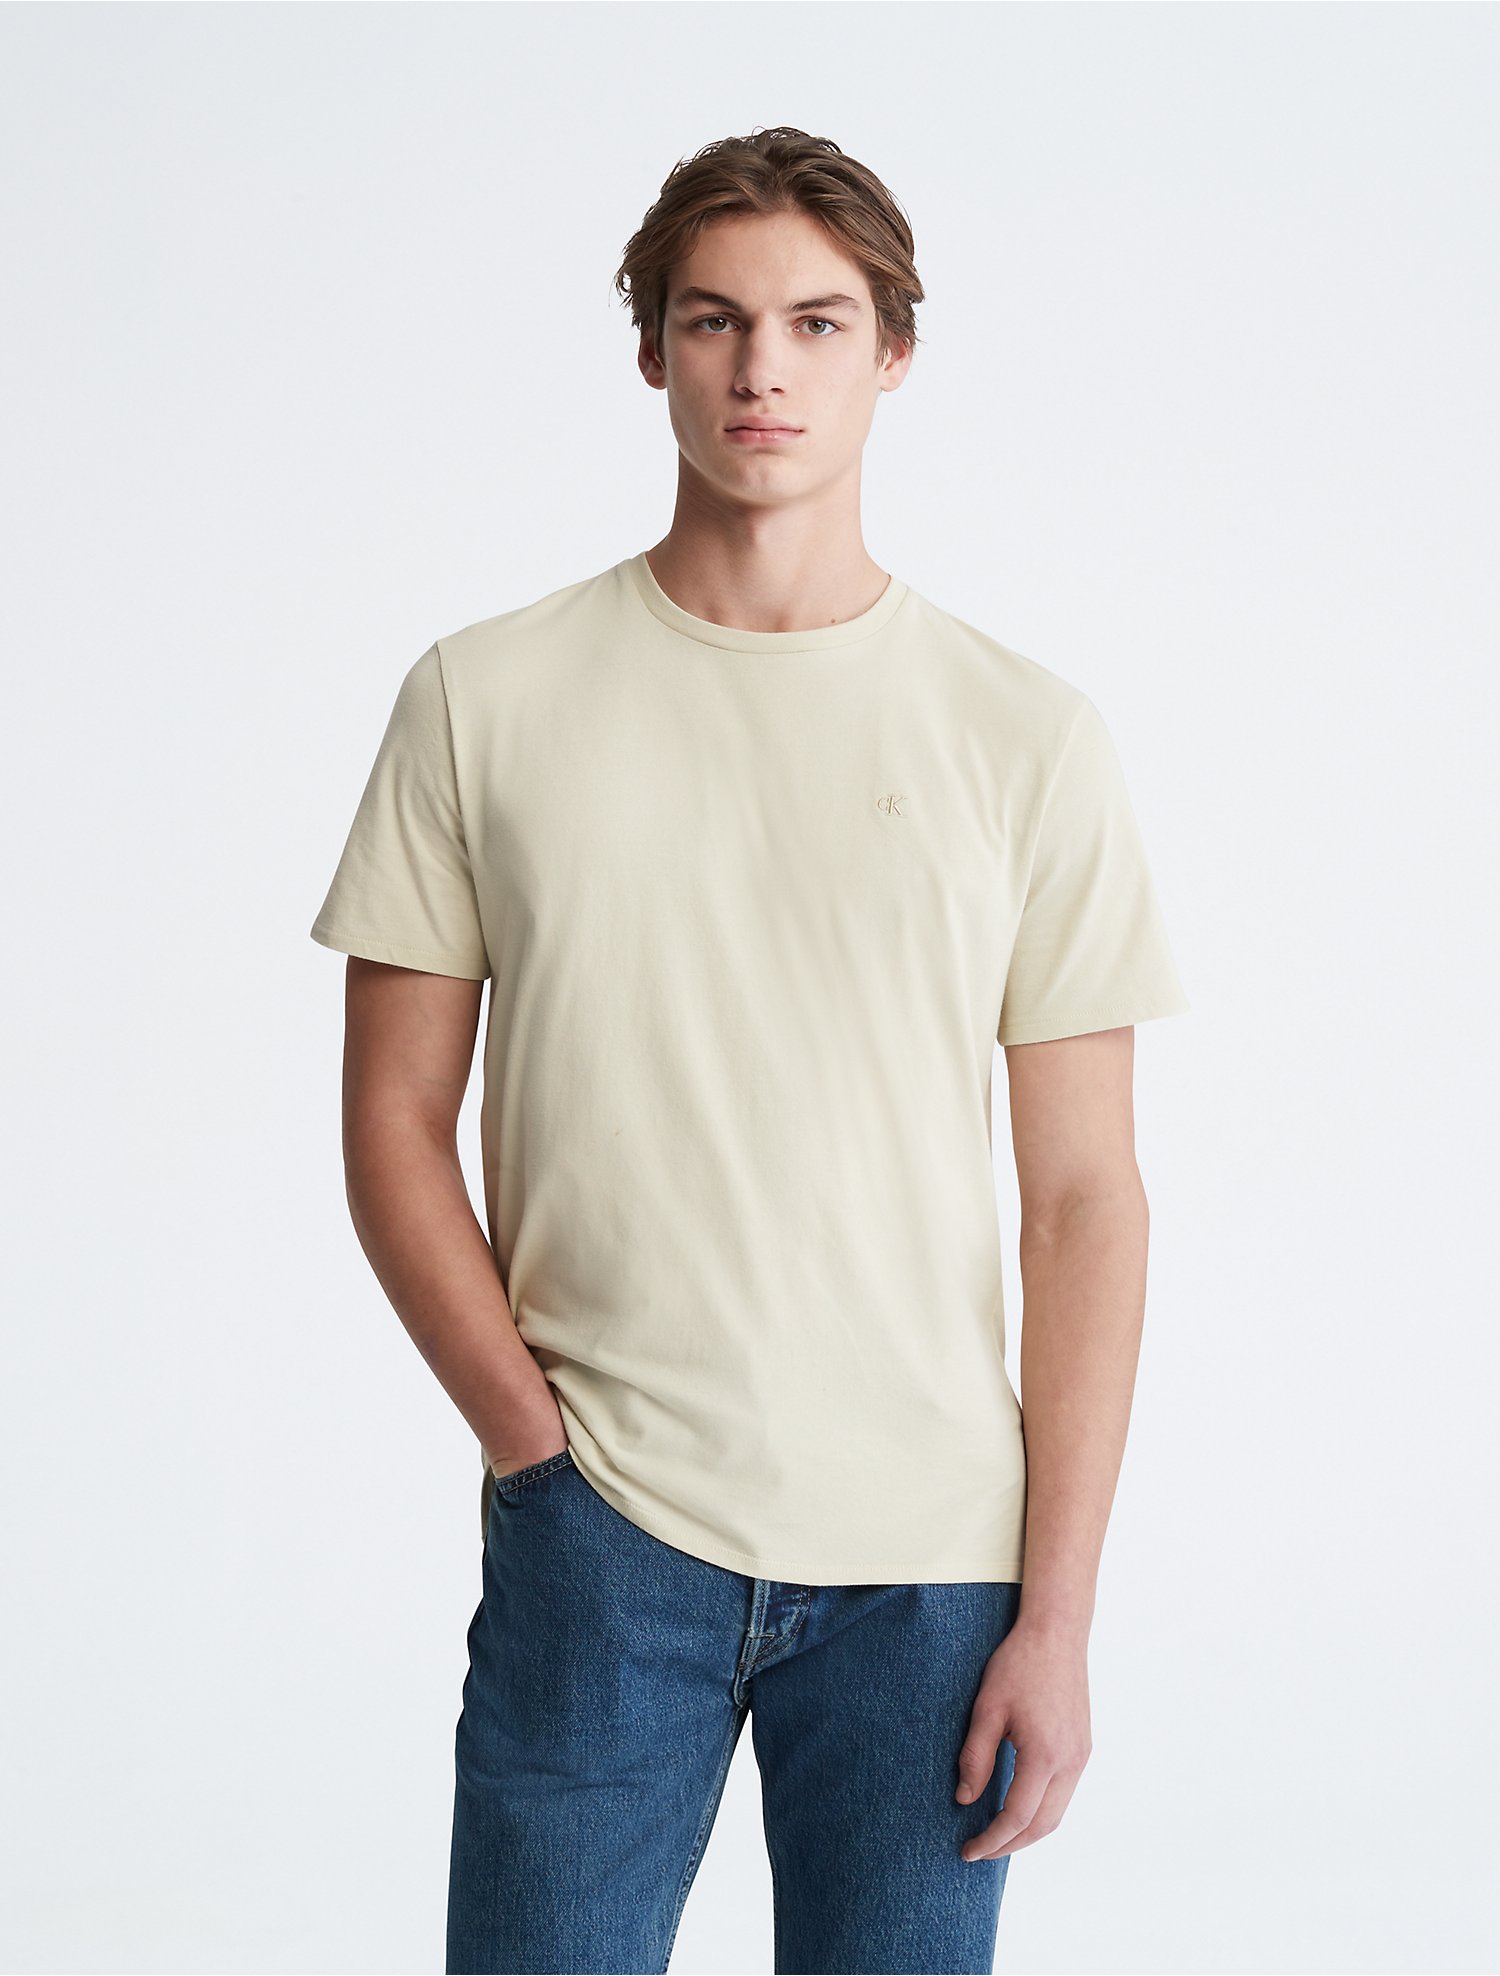 Smooth Cotton Solid T-Shirt | Calvin